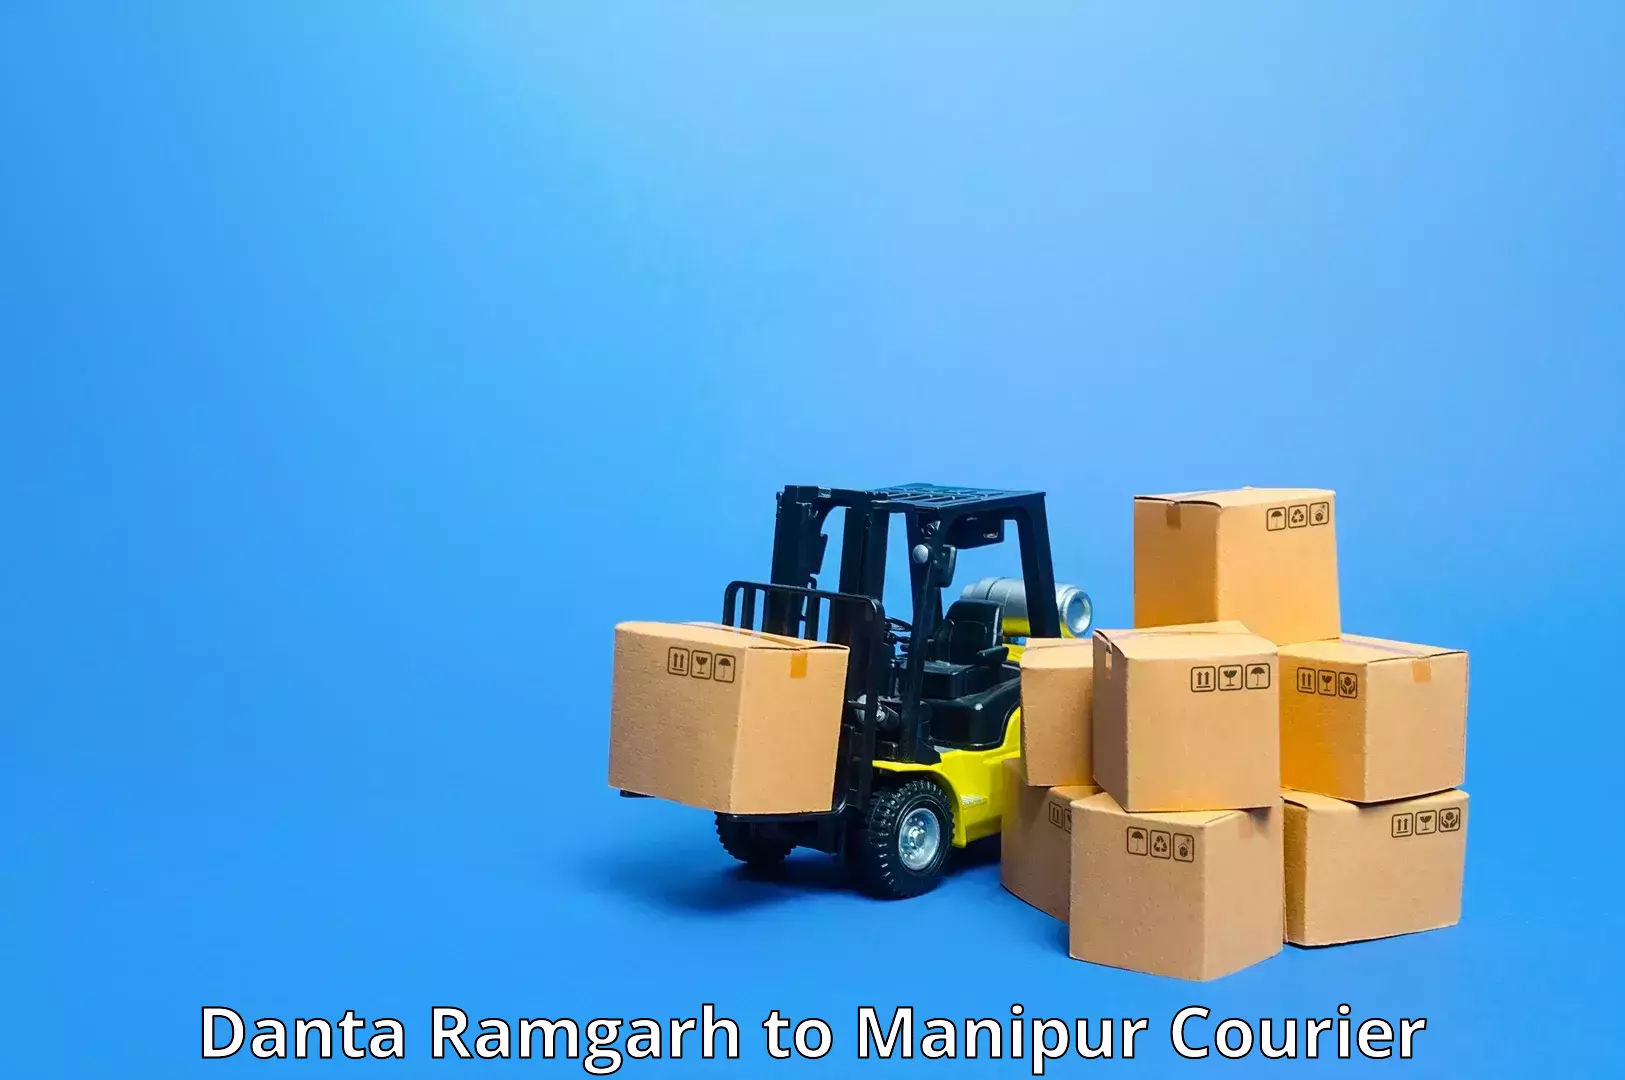 User-friendly delivery service Danta Ramgarh to Manipur